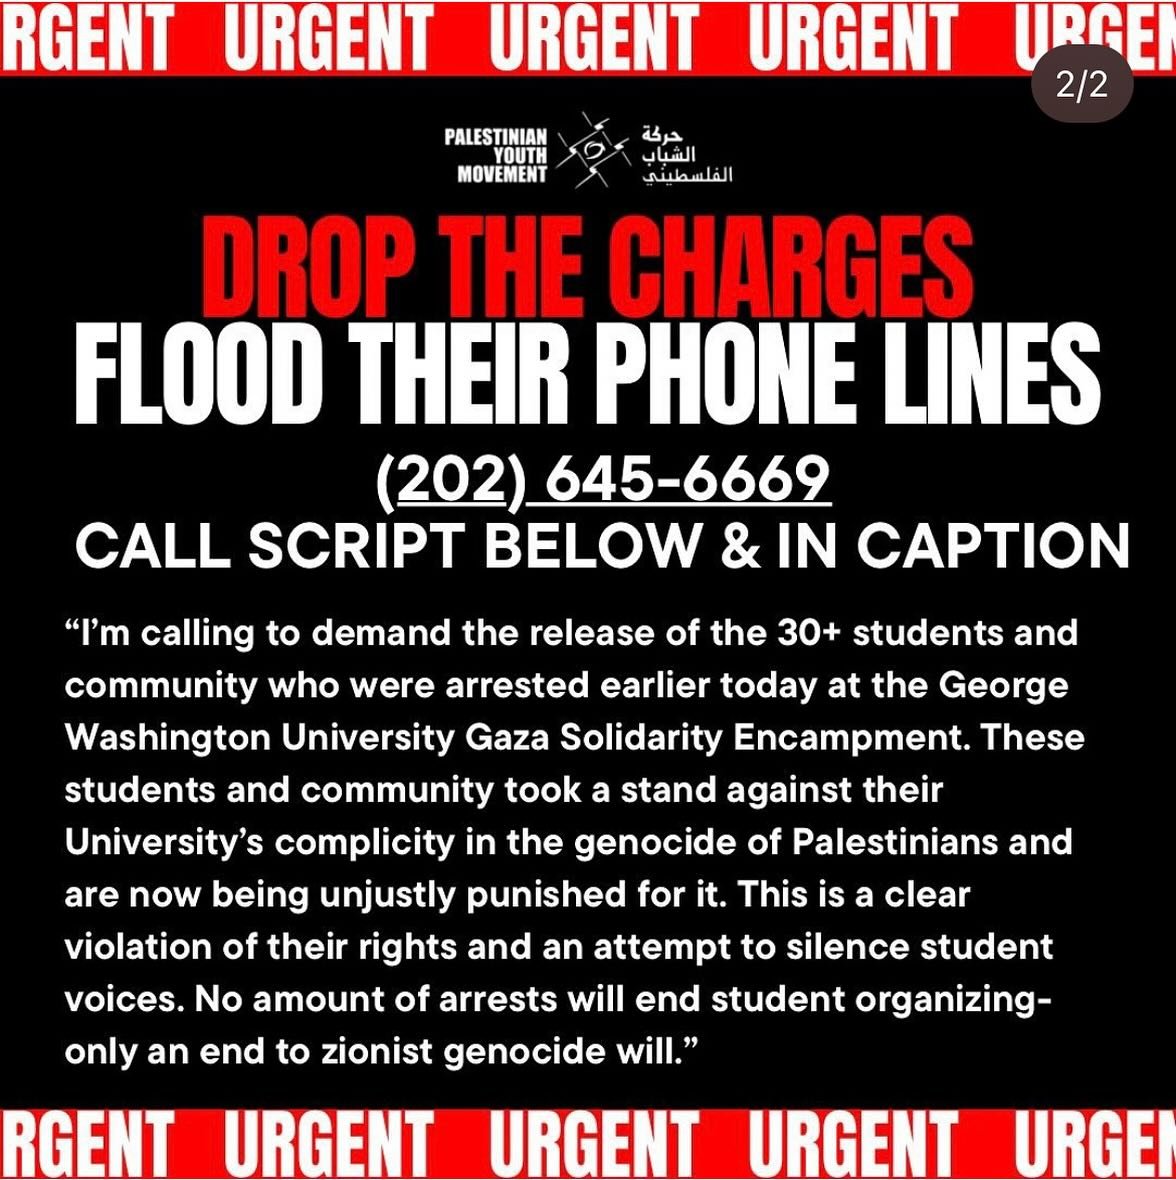 This morning at 4am cops committed mass arrests and vandalized the Popular University at George Washington University Yard/Shuhada Square. Please make these calls to have charges dropped against students and community members and come out to in perso